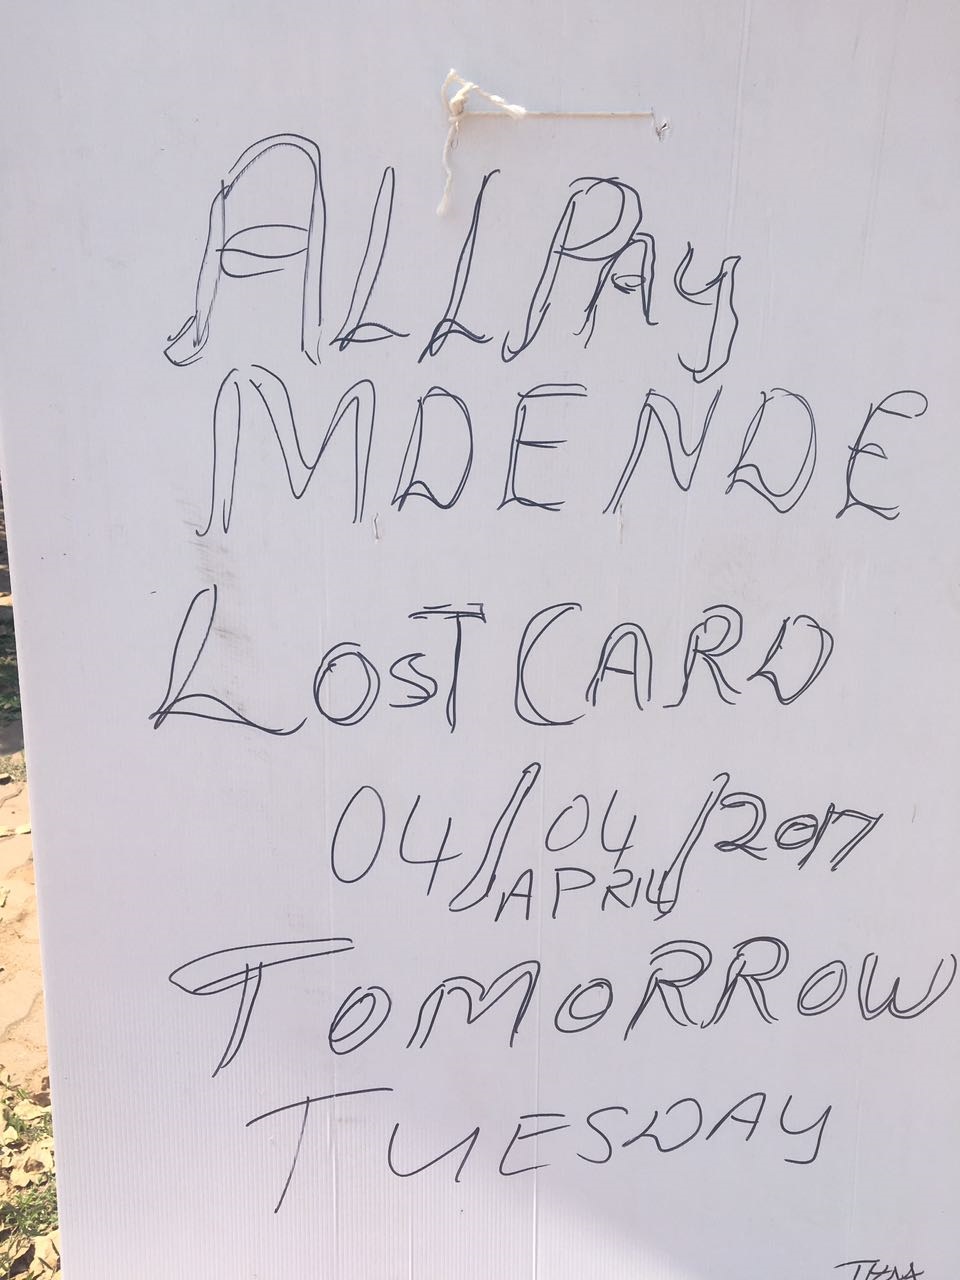 A make-shift sign at the Rabasotho Community Centre in Tembisa, informing grant recipients that they would only be able to collect their Sassa payouts from tomorrow. PHOTO: 